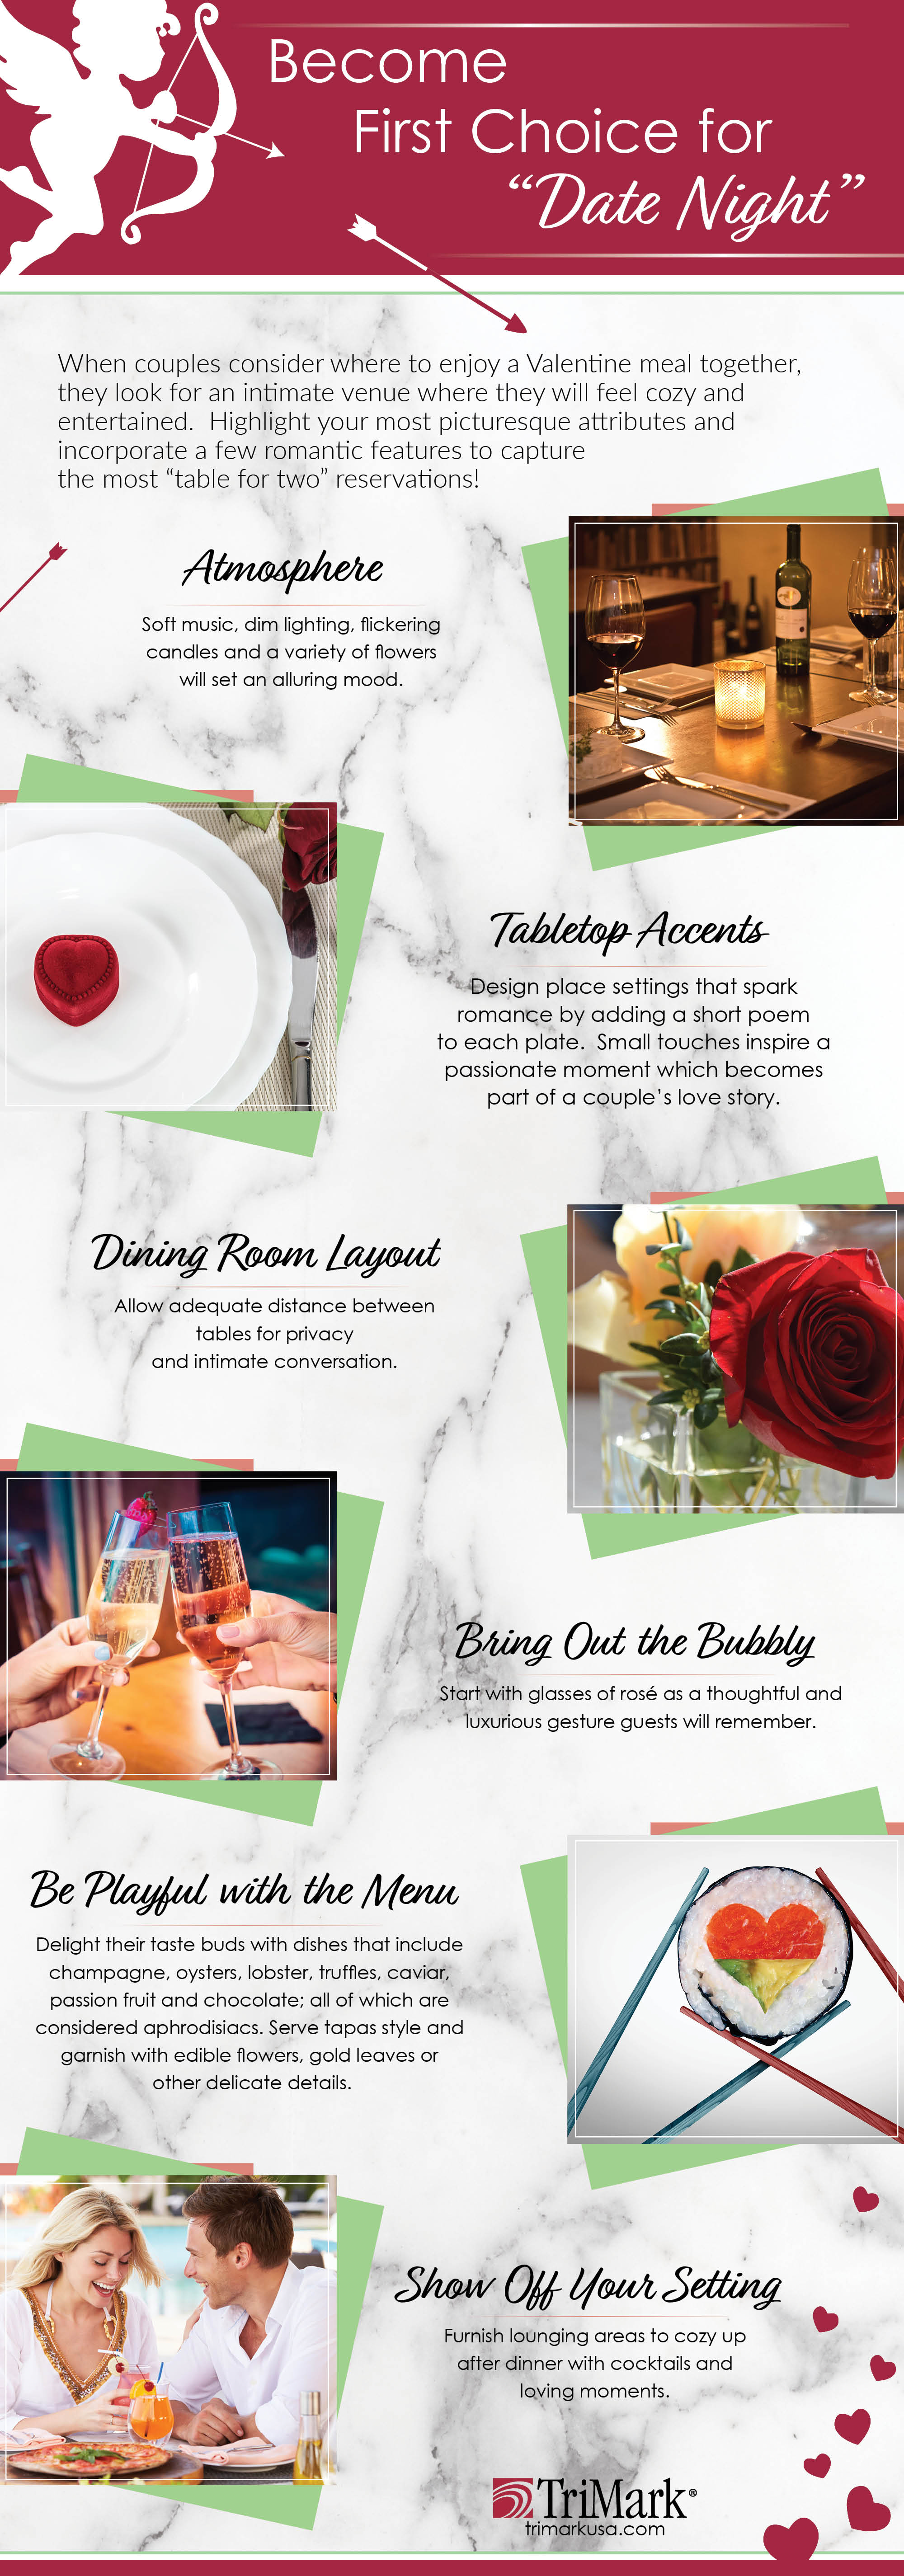 Infographic - Becoming First Choice for Date Night